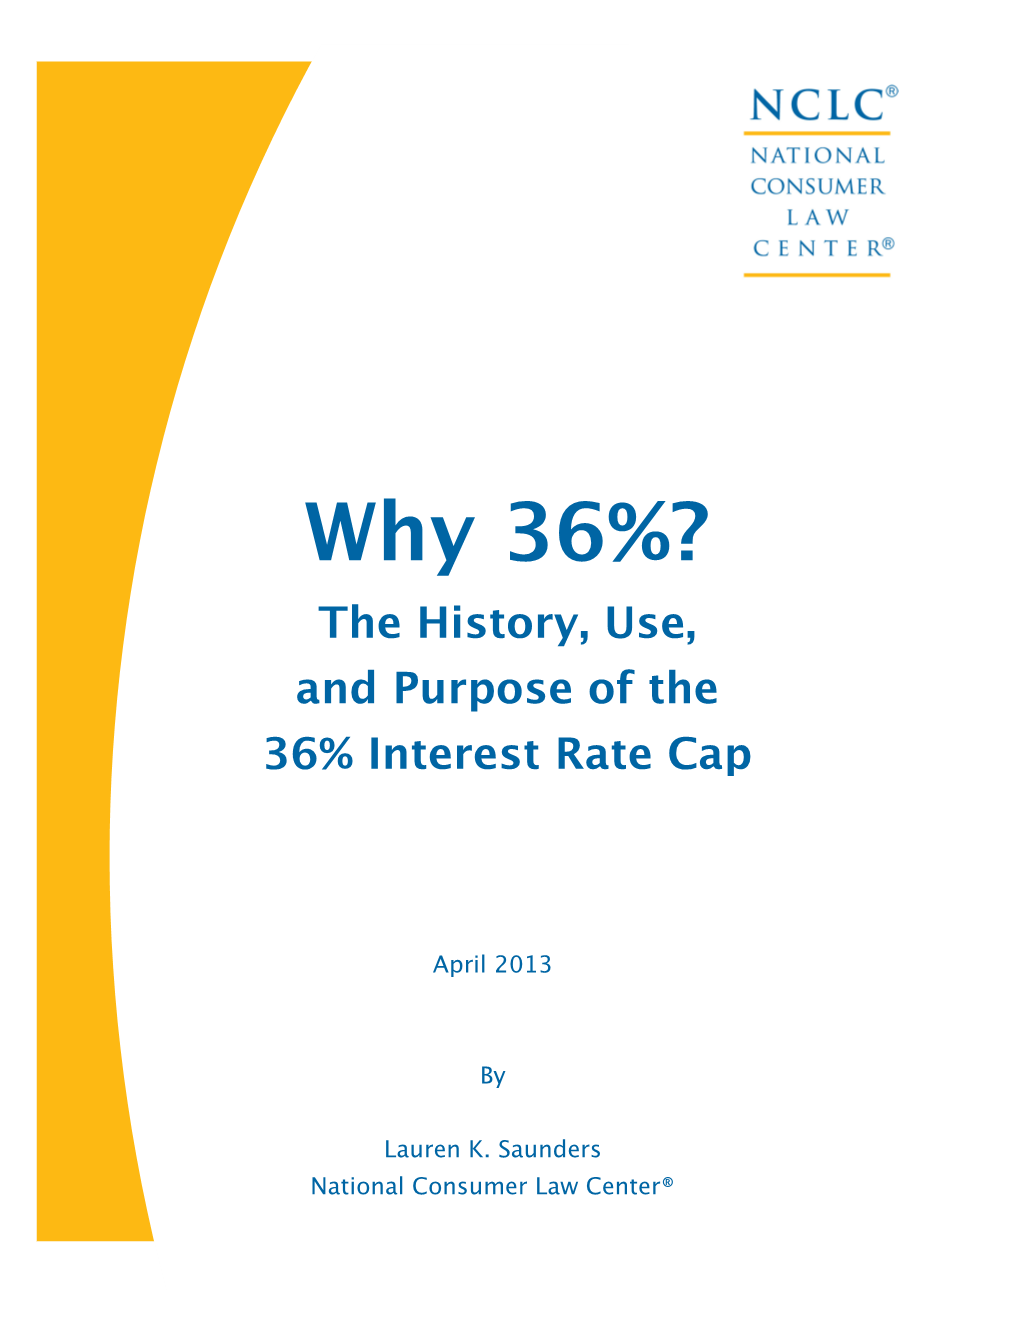 Why 36%? the History, Use, and Purpose of the 36% Interest Rate Cap